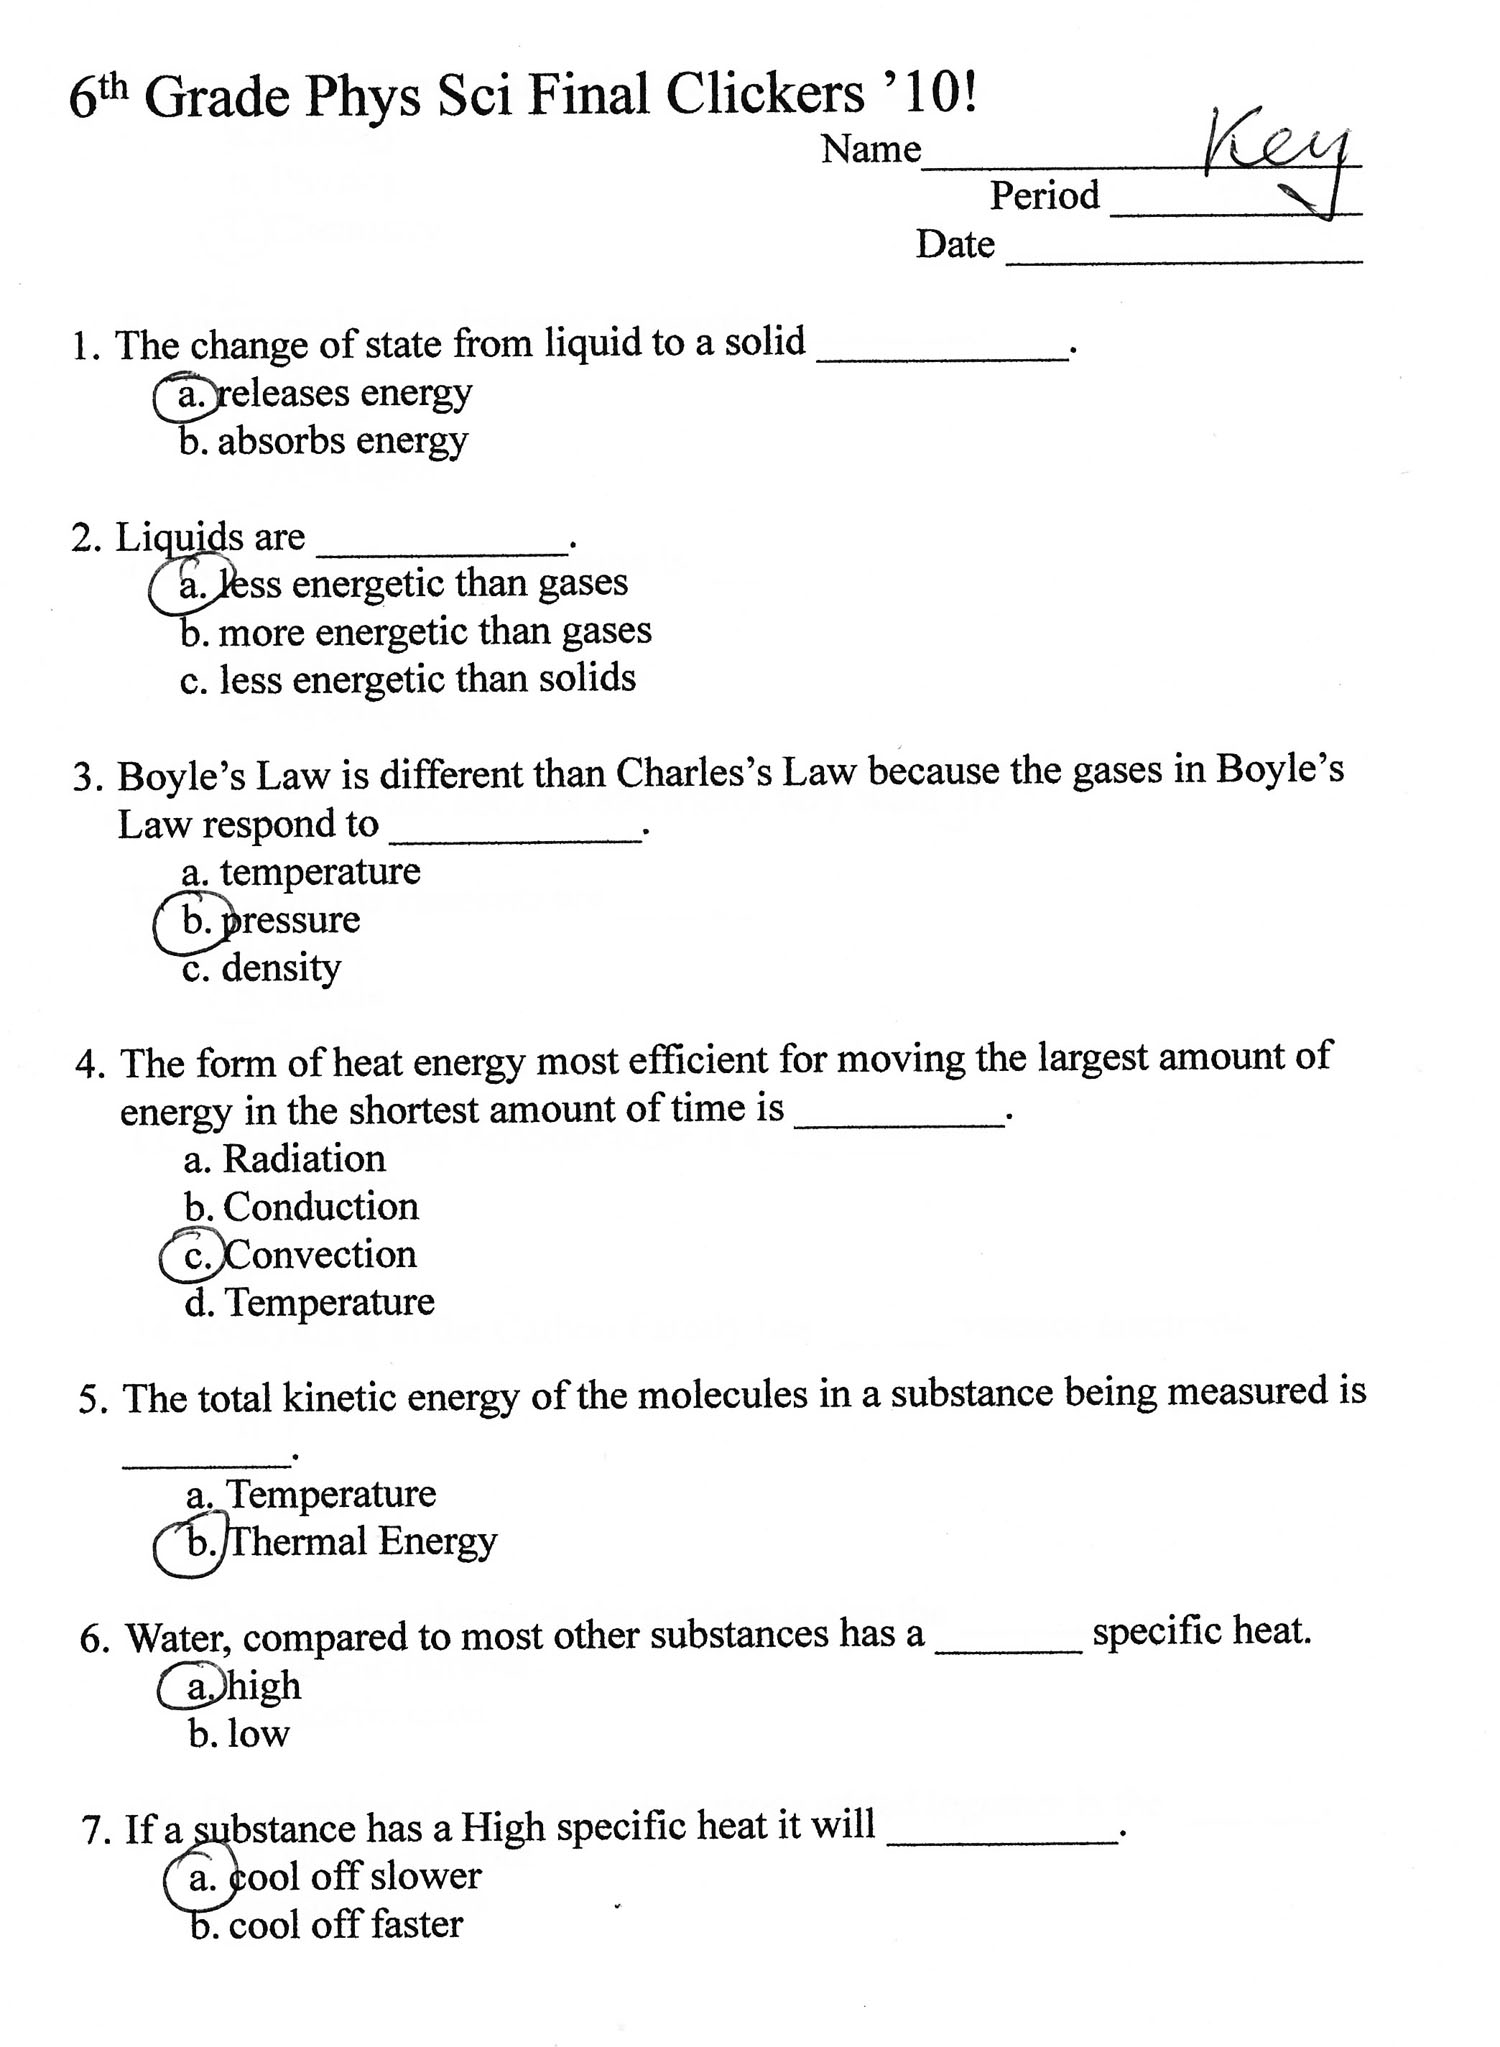 6th Grade Physical Science Worksheets Image